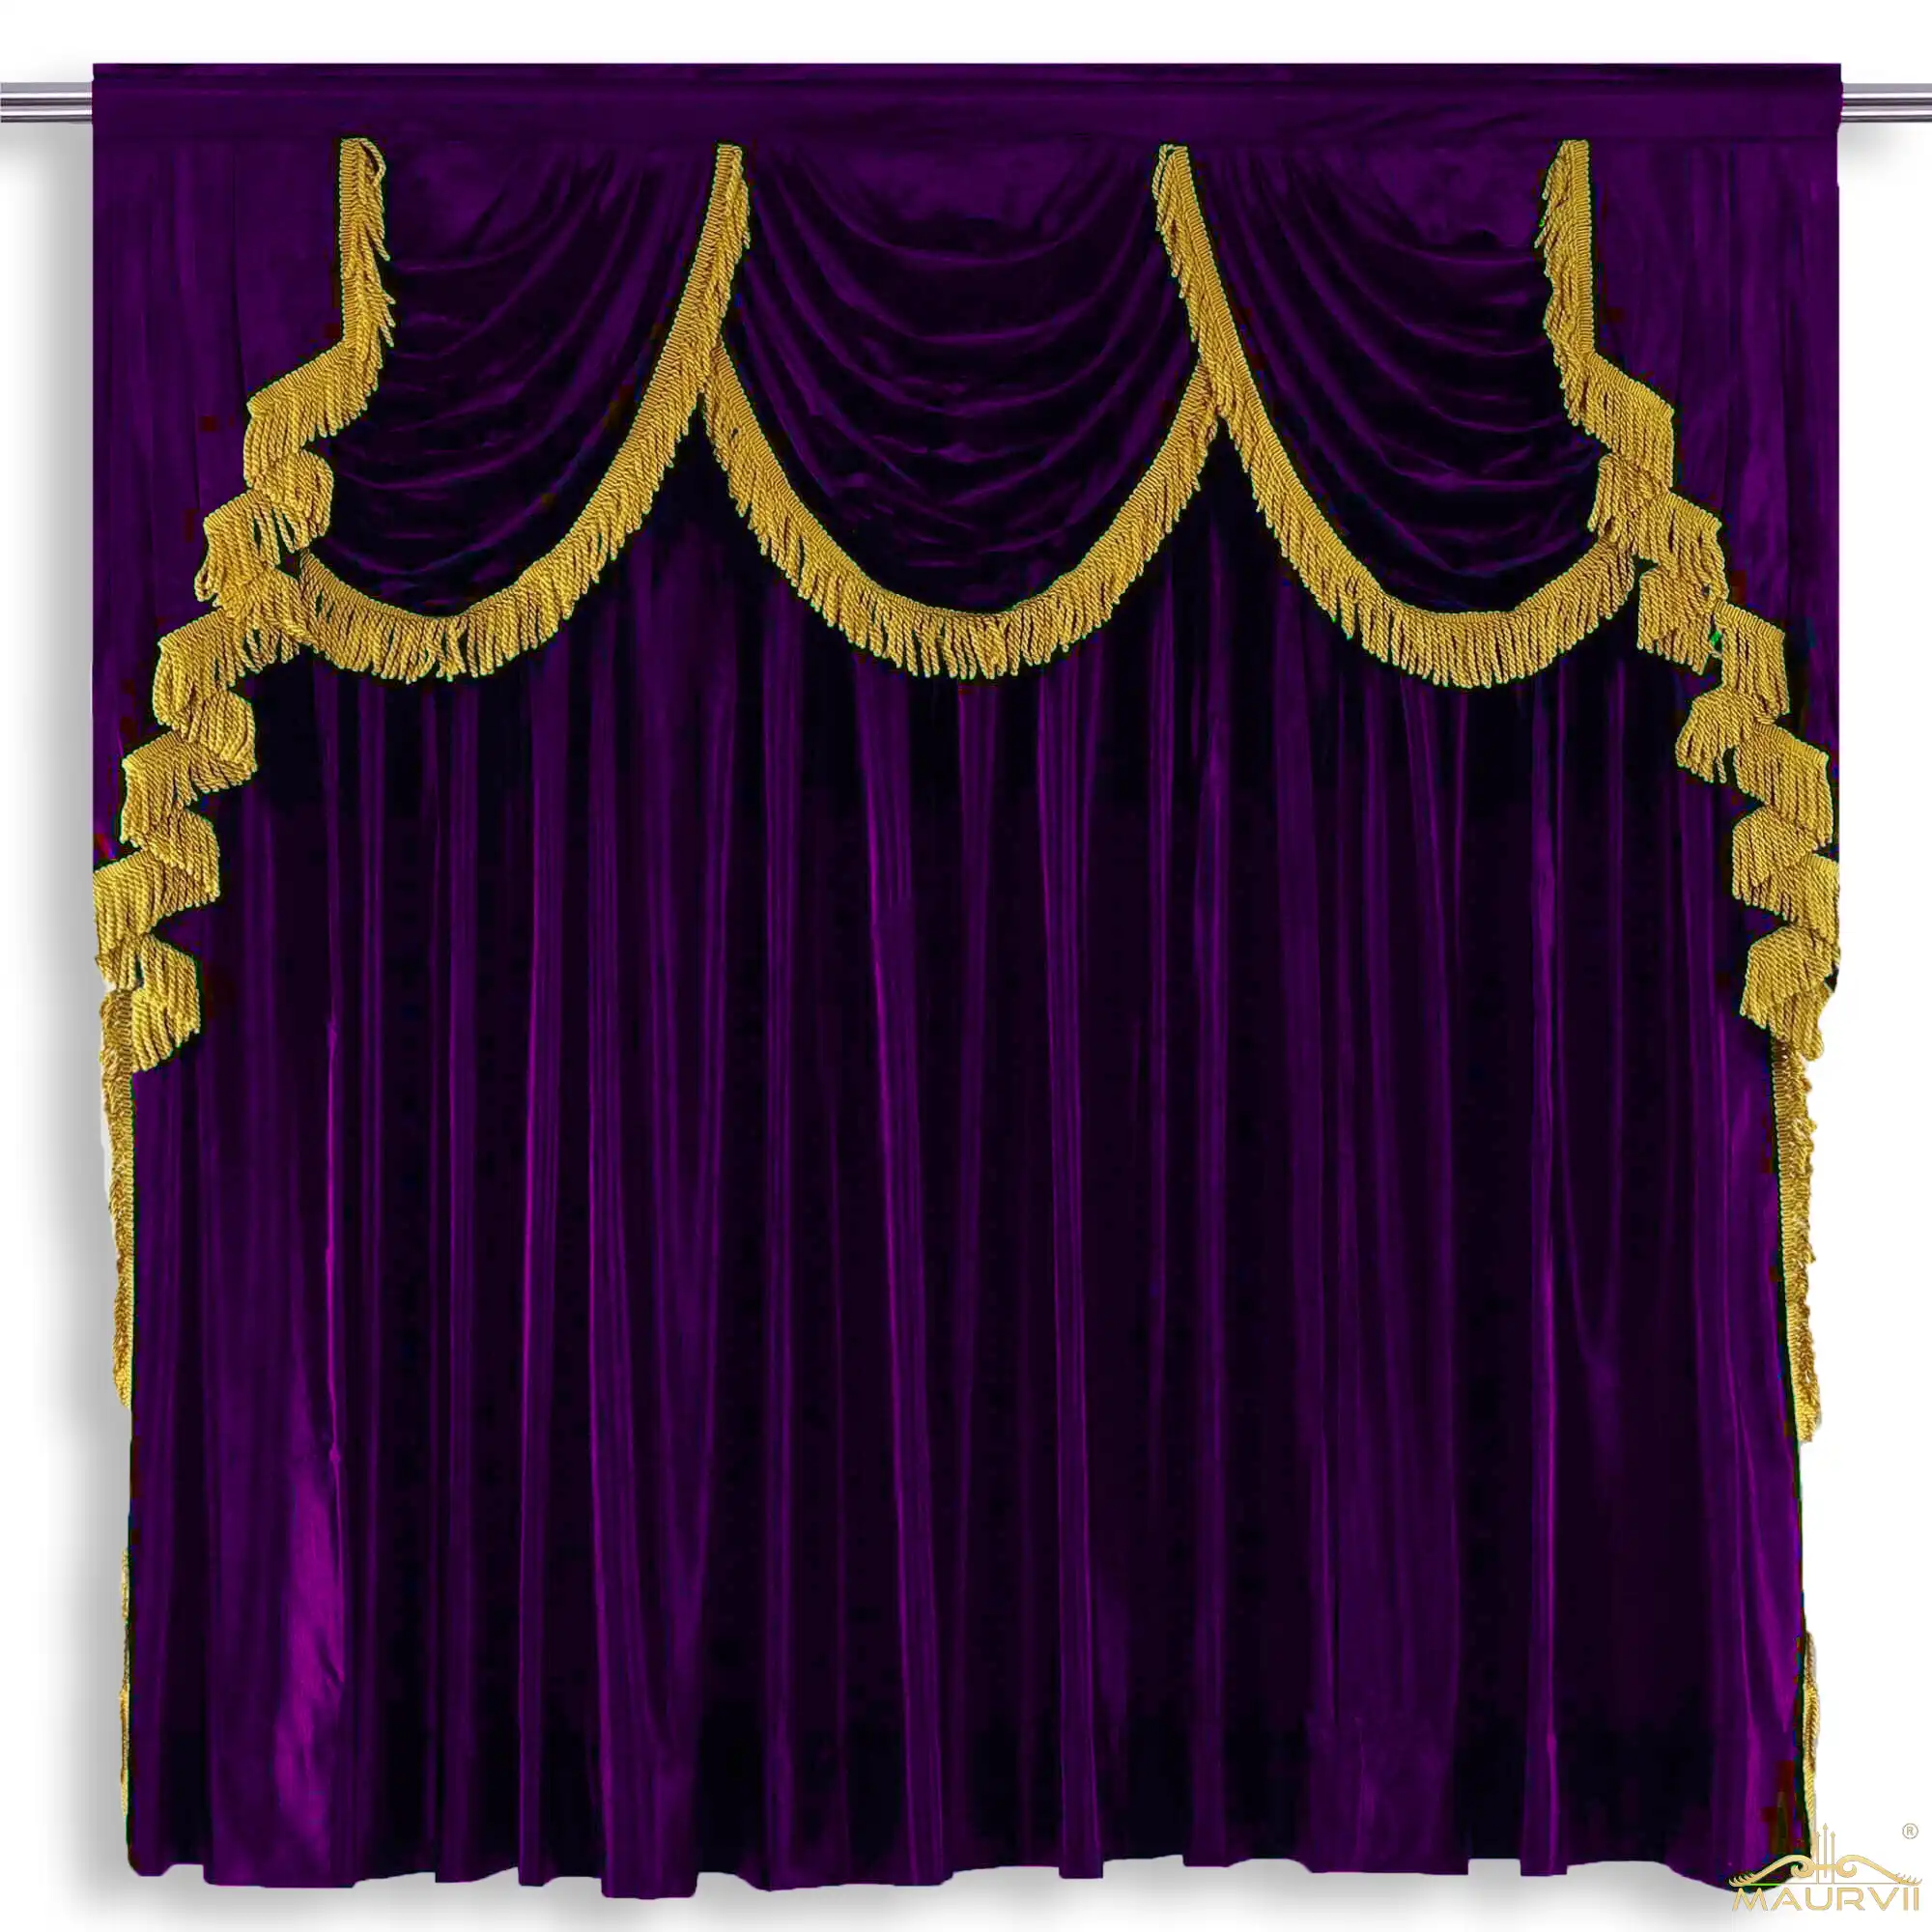 Plum stage curtains with fringe